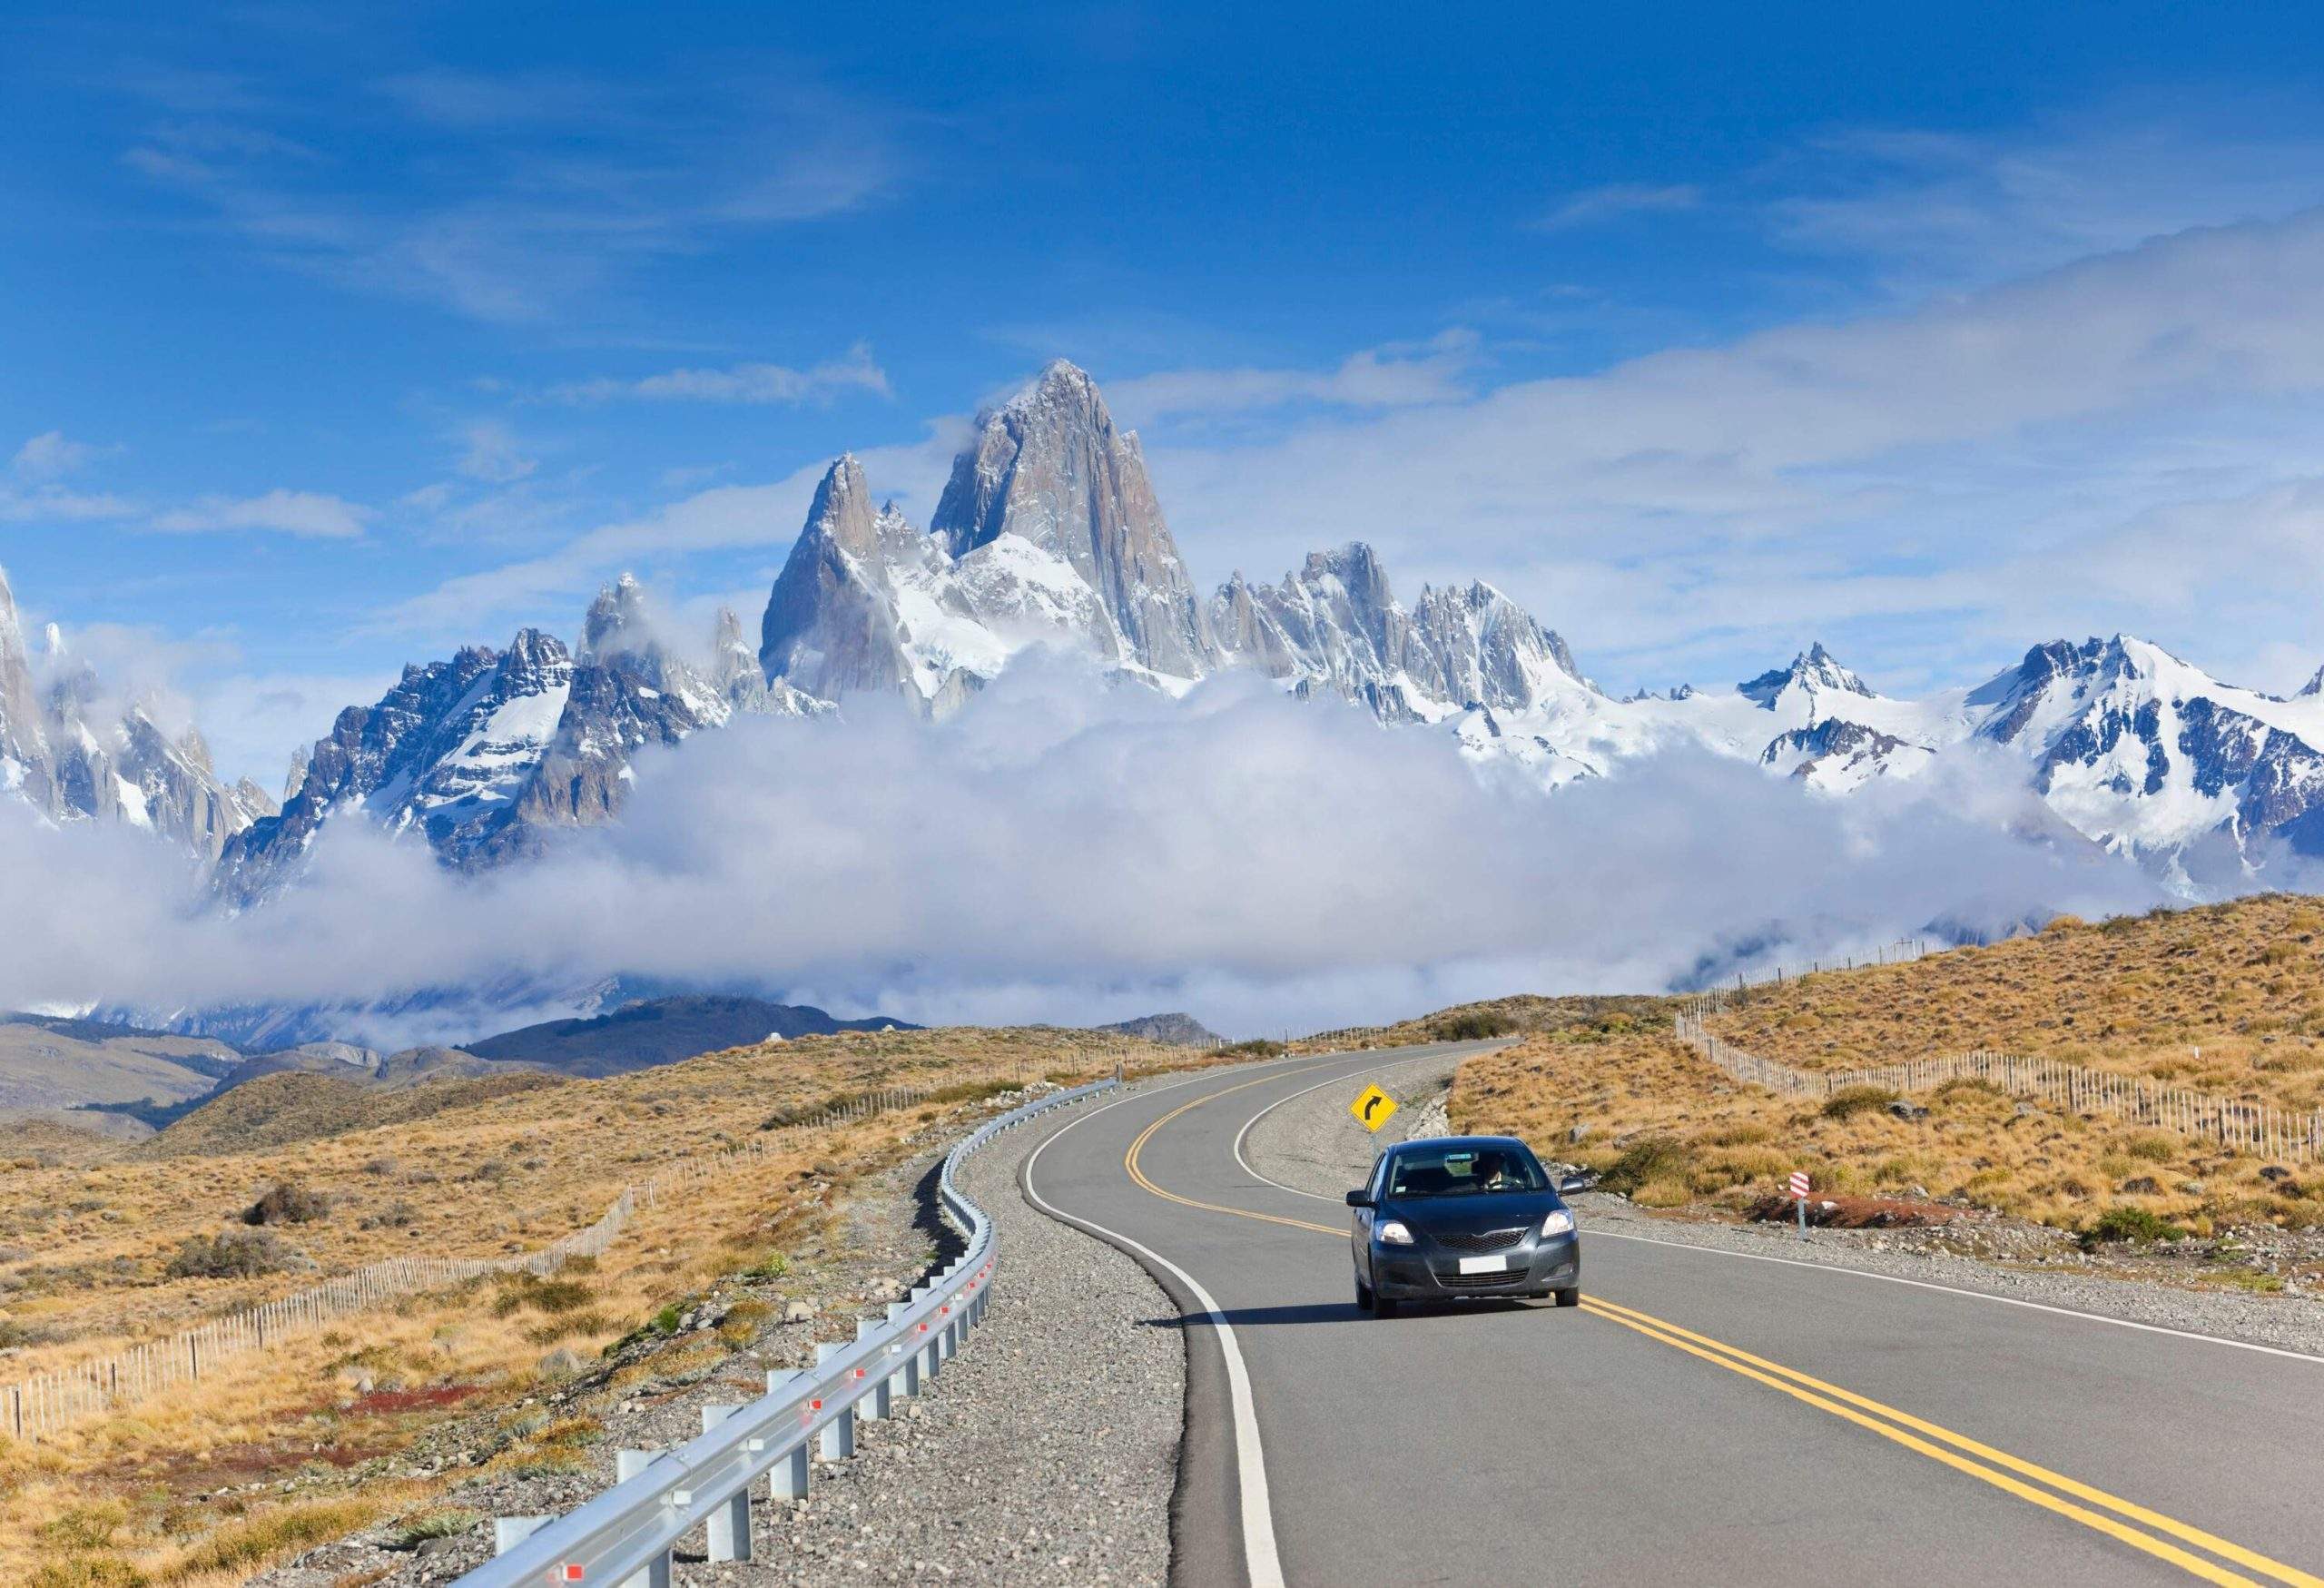 dest_argentina_patagonia_mountains_nature_car_road_gettyimages-182498629